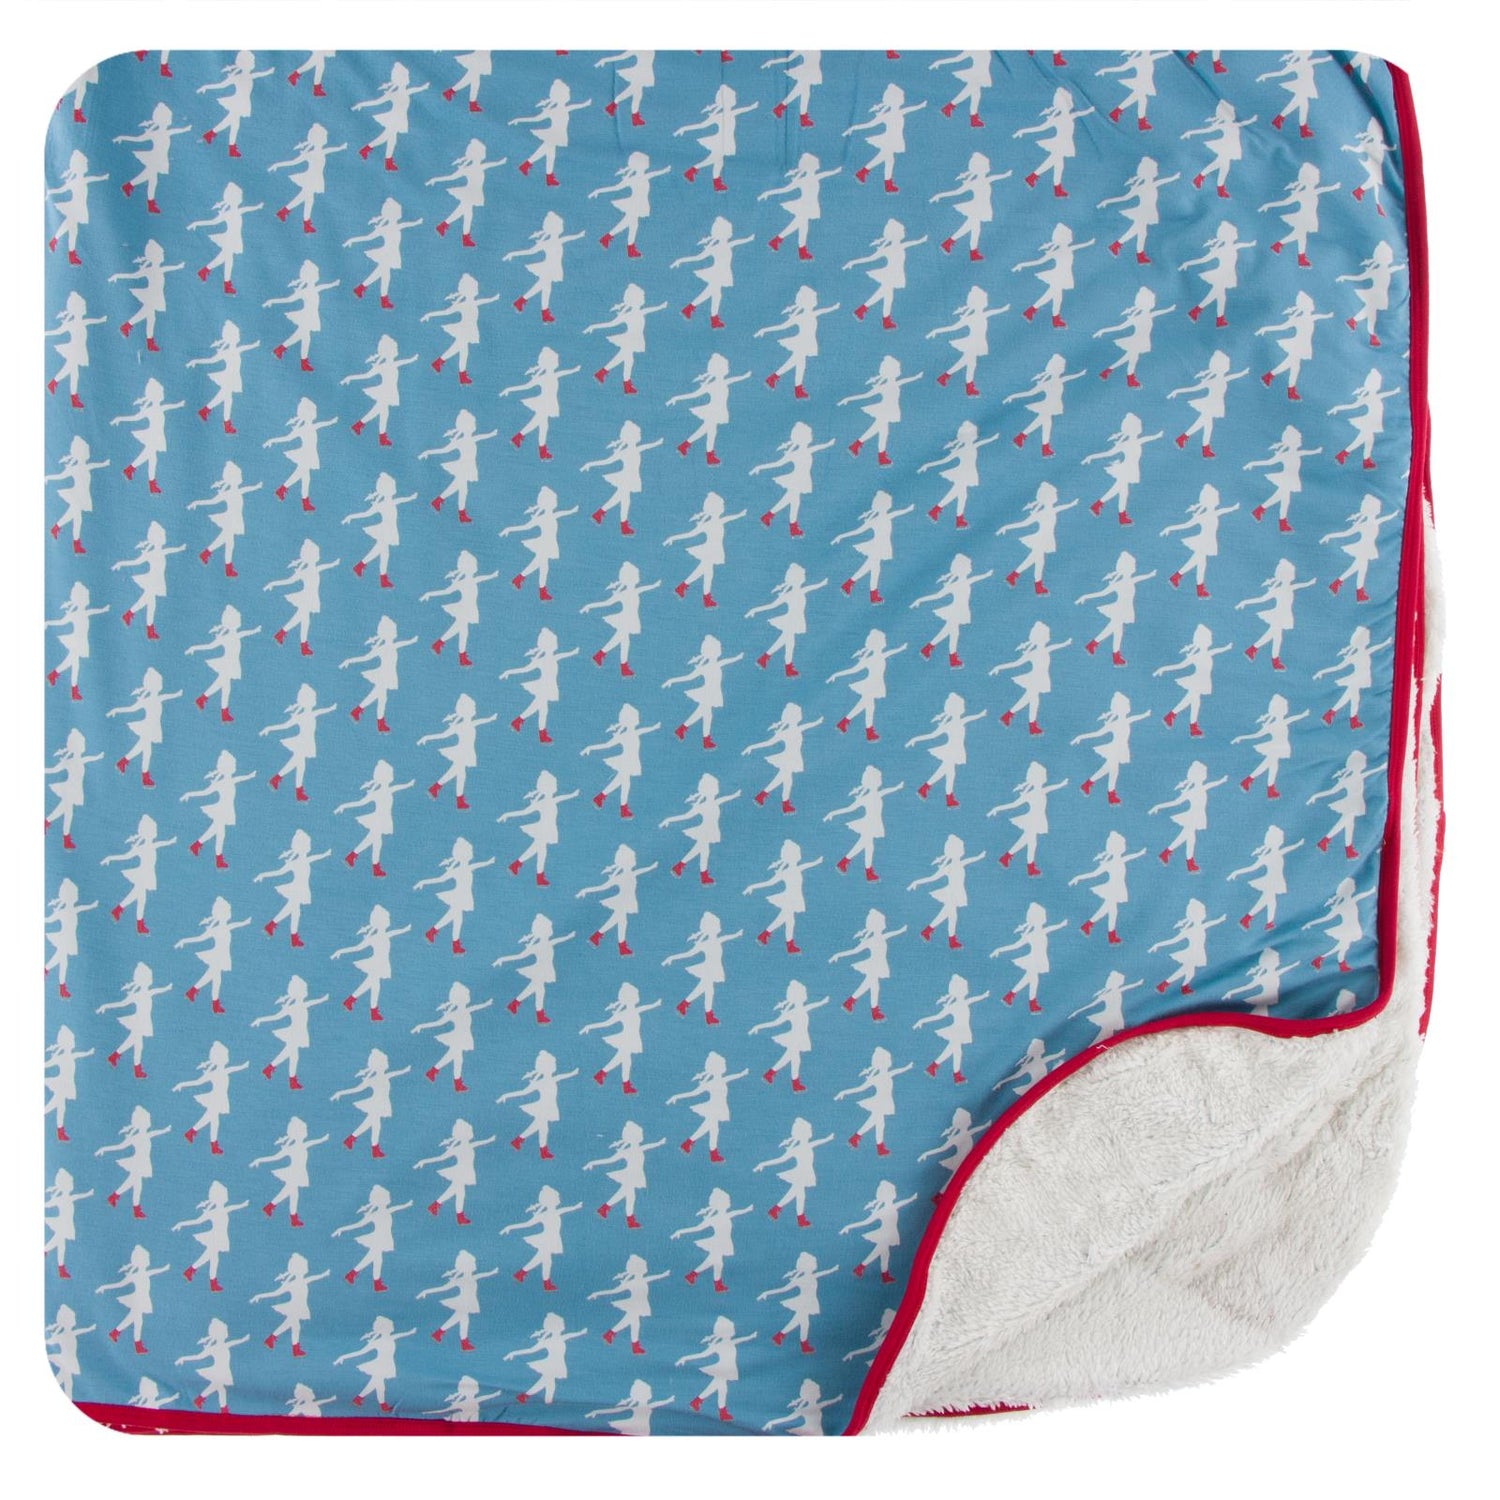 Print Sherpa-Lined Throw Blanket in Blue Moon Ice Skater